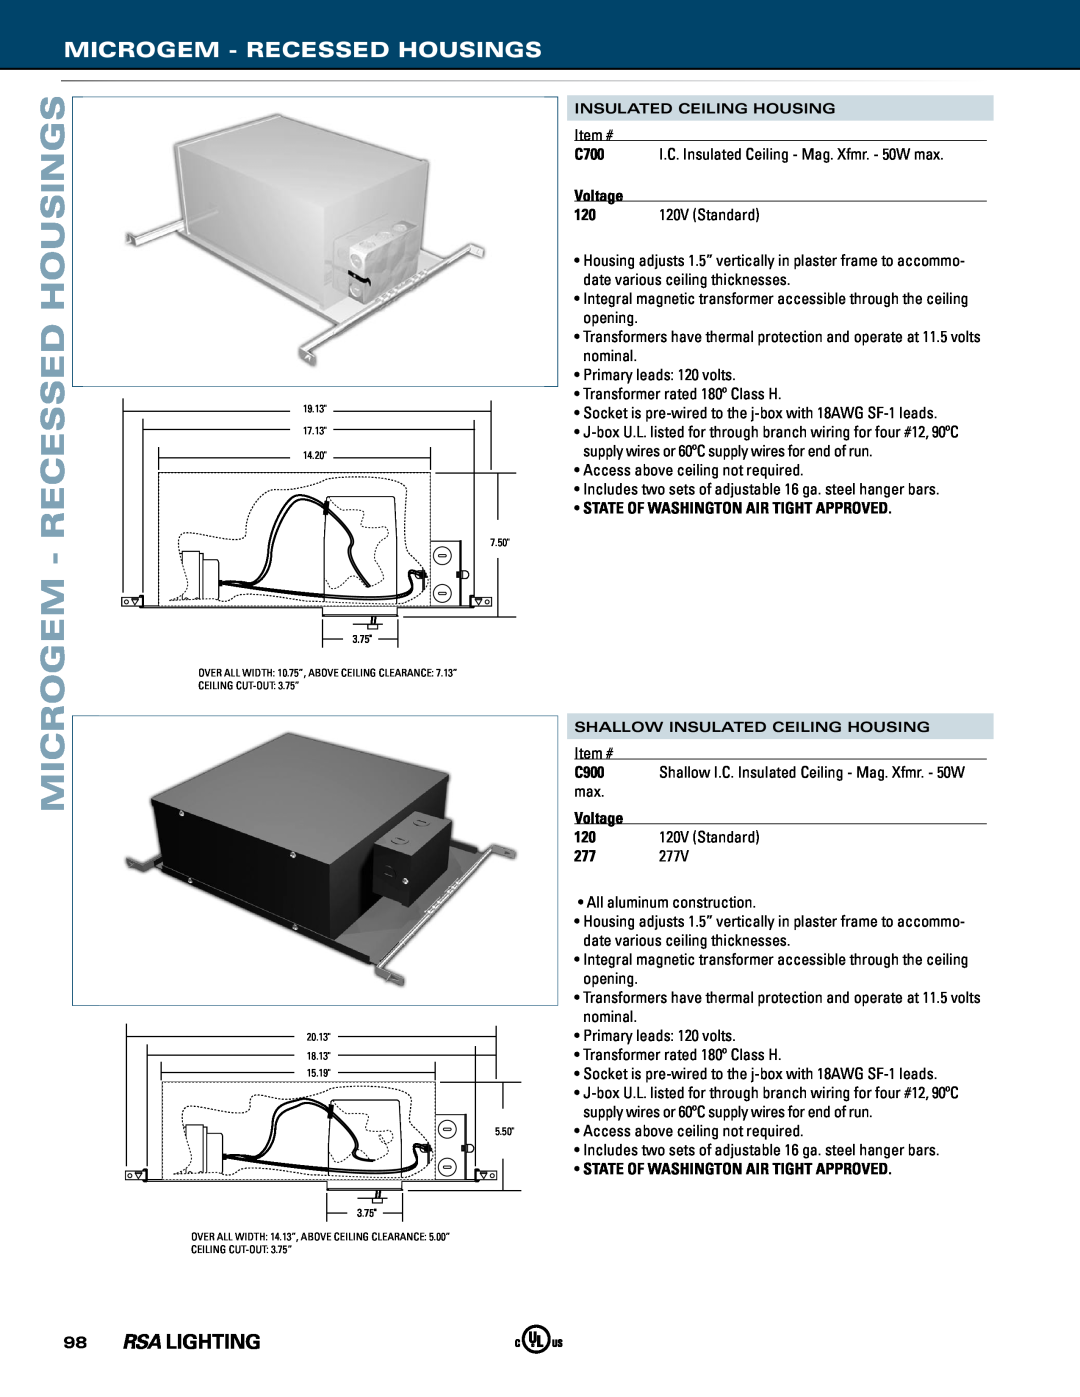 Cooper Lighting manual Microgem - RECESSED HOUSINGS, C700, Voltage, State of Washington Air Tight Approved, C900 